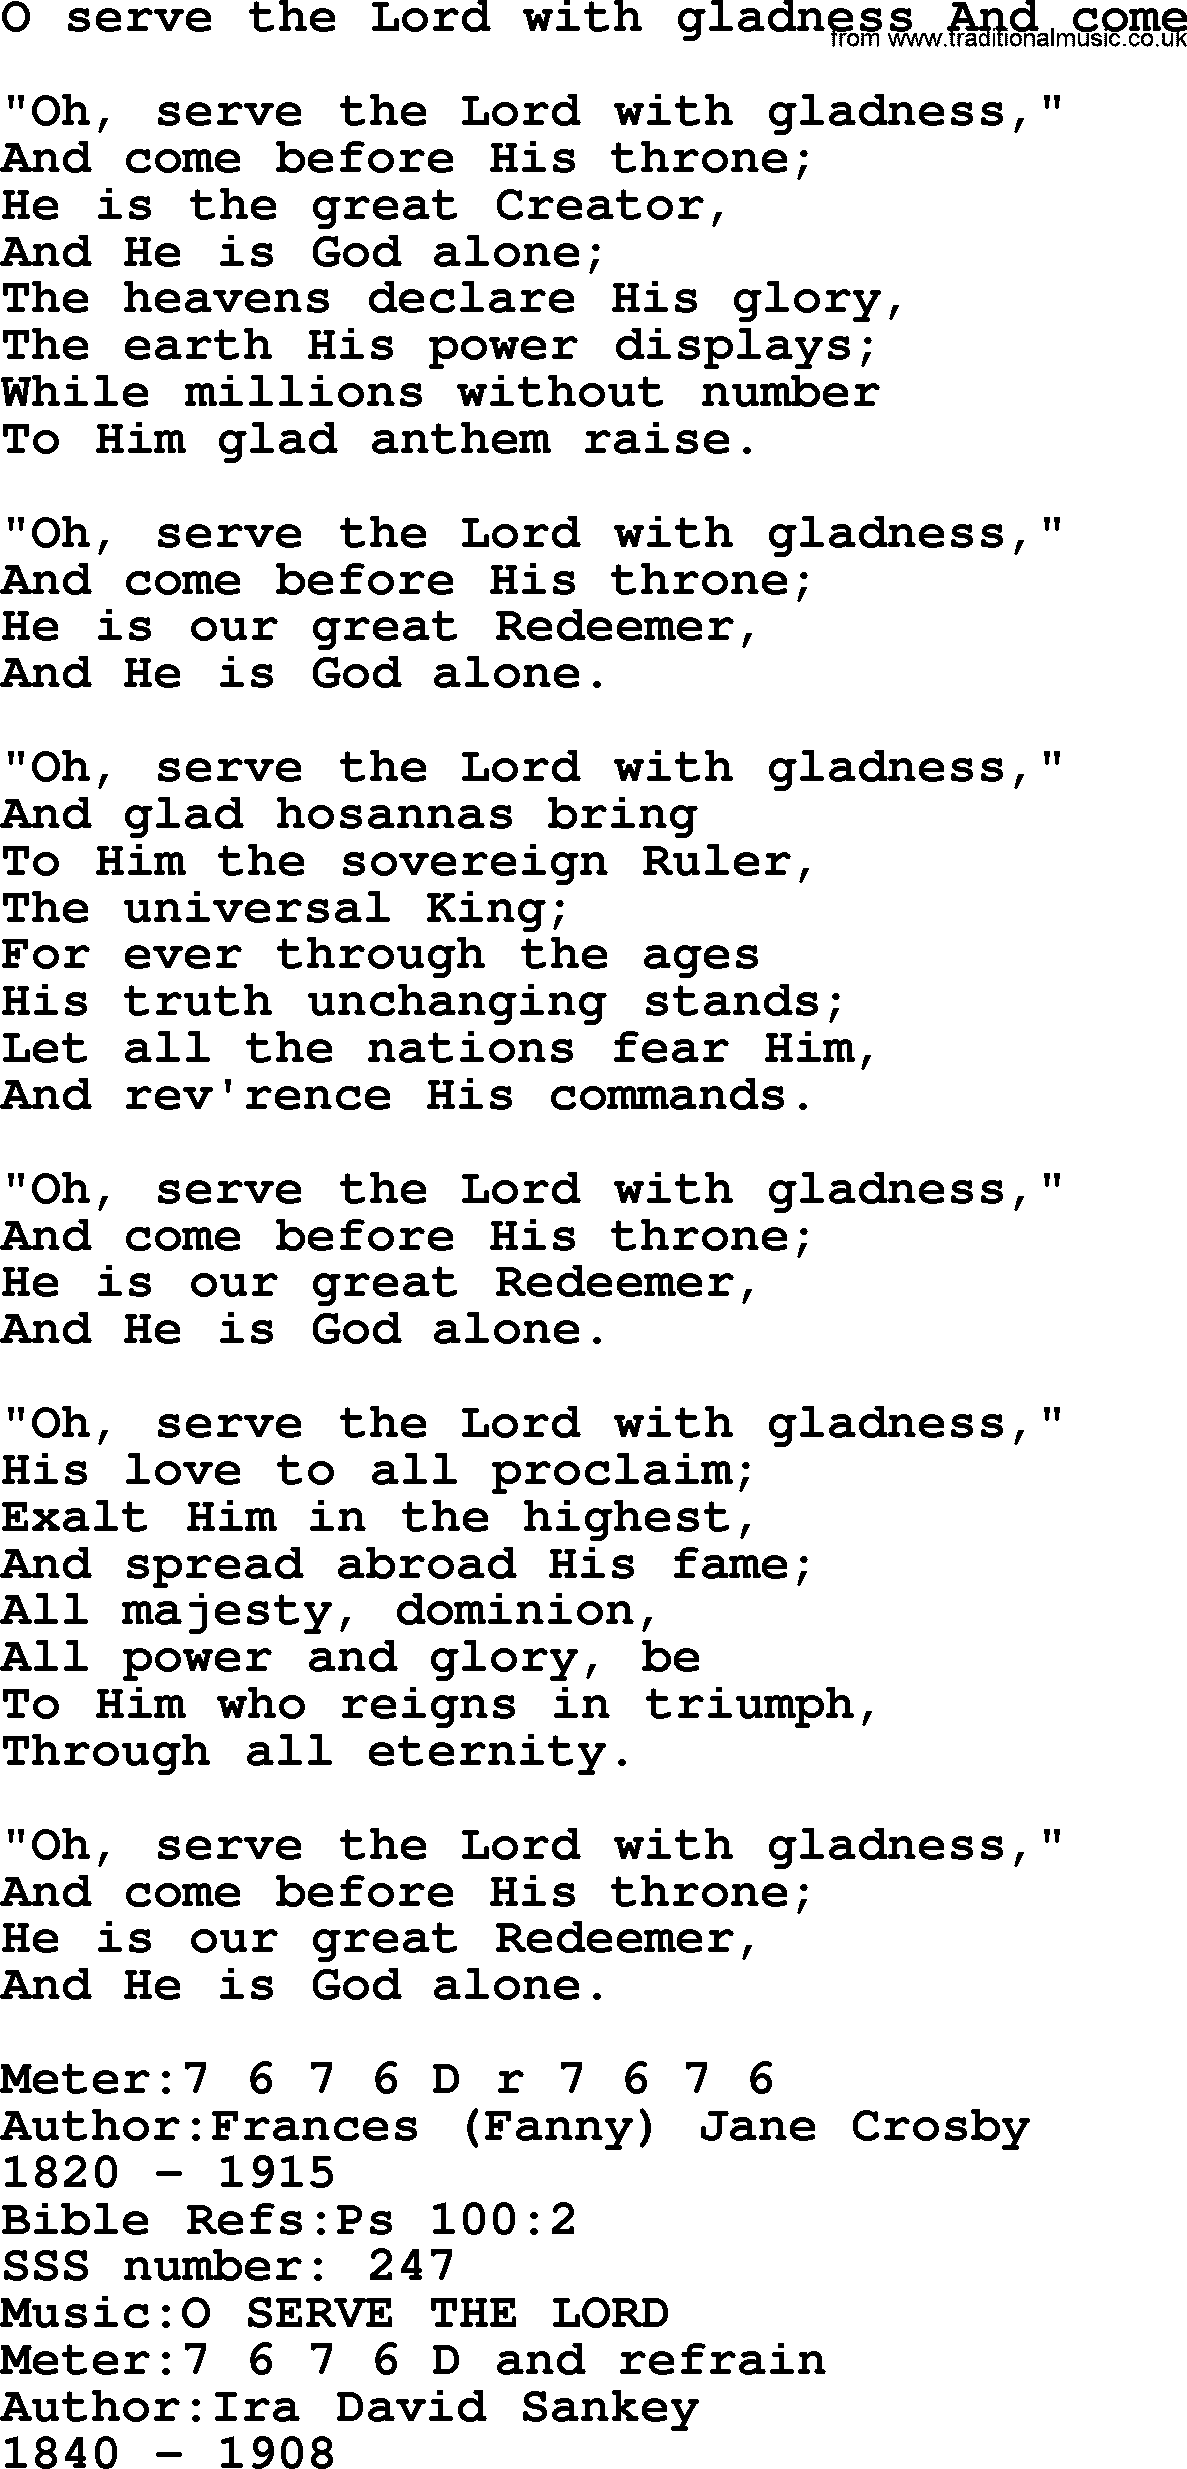 Sacred Songs and Solos complete, 1200 Hymns, title: O Serve The Lord With Gladness And Come, lyrics and PDF